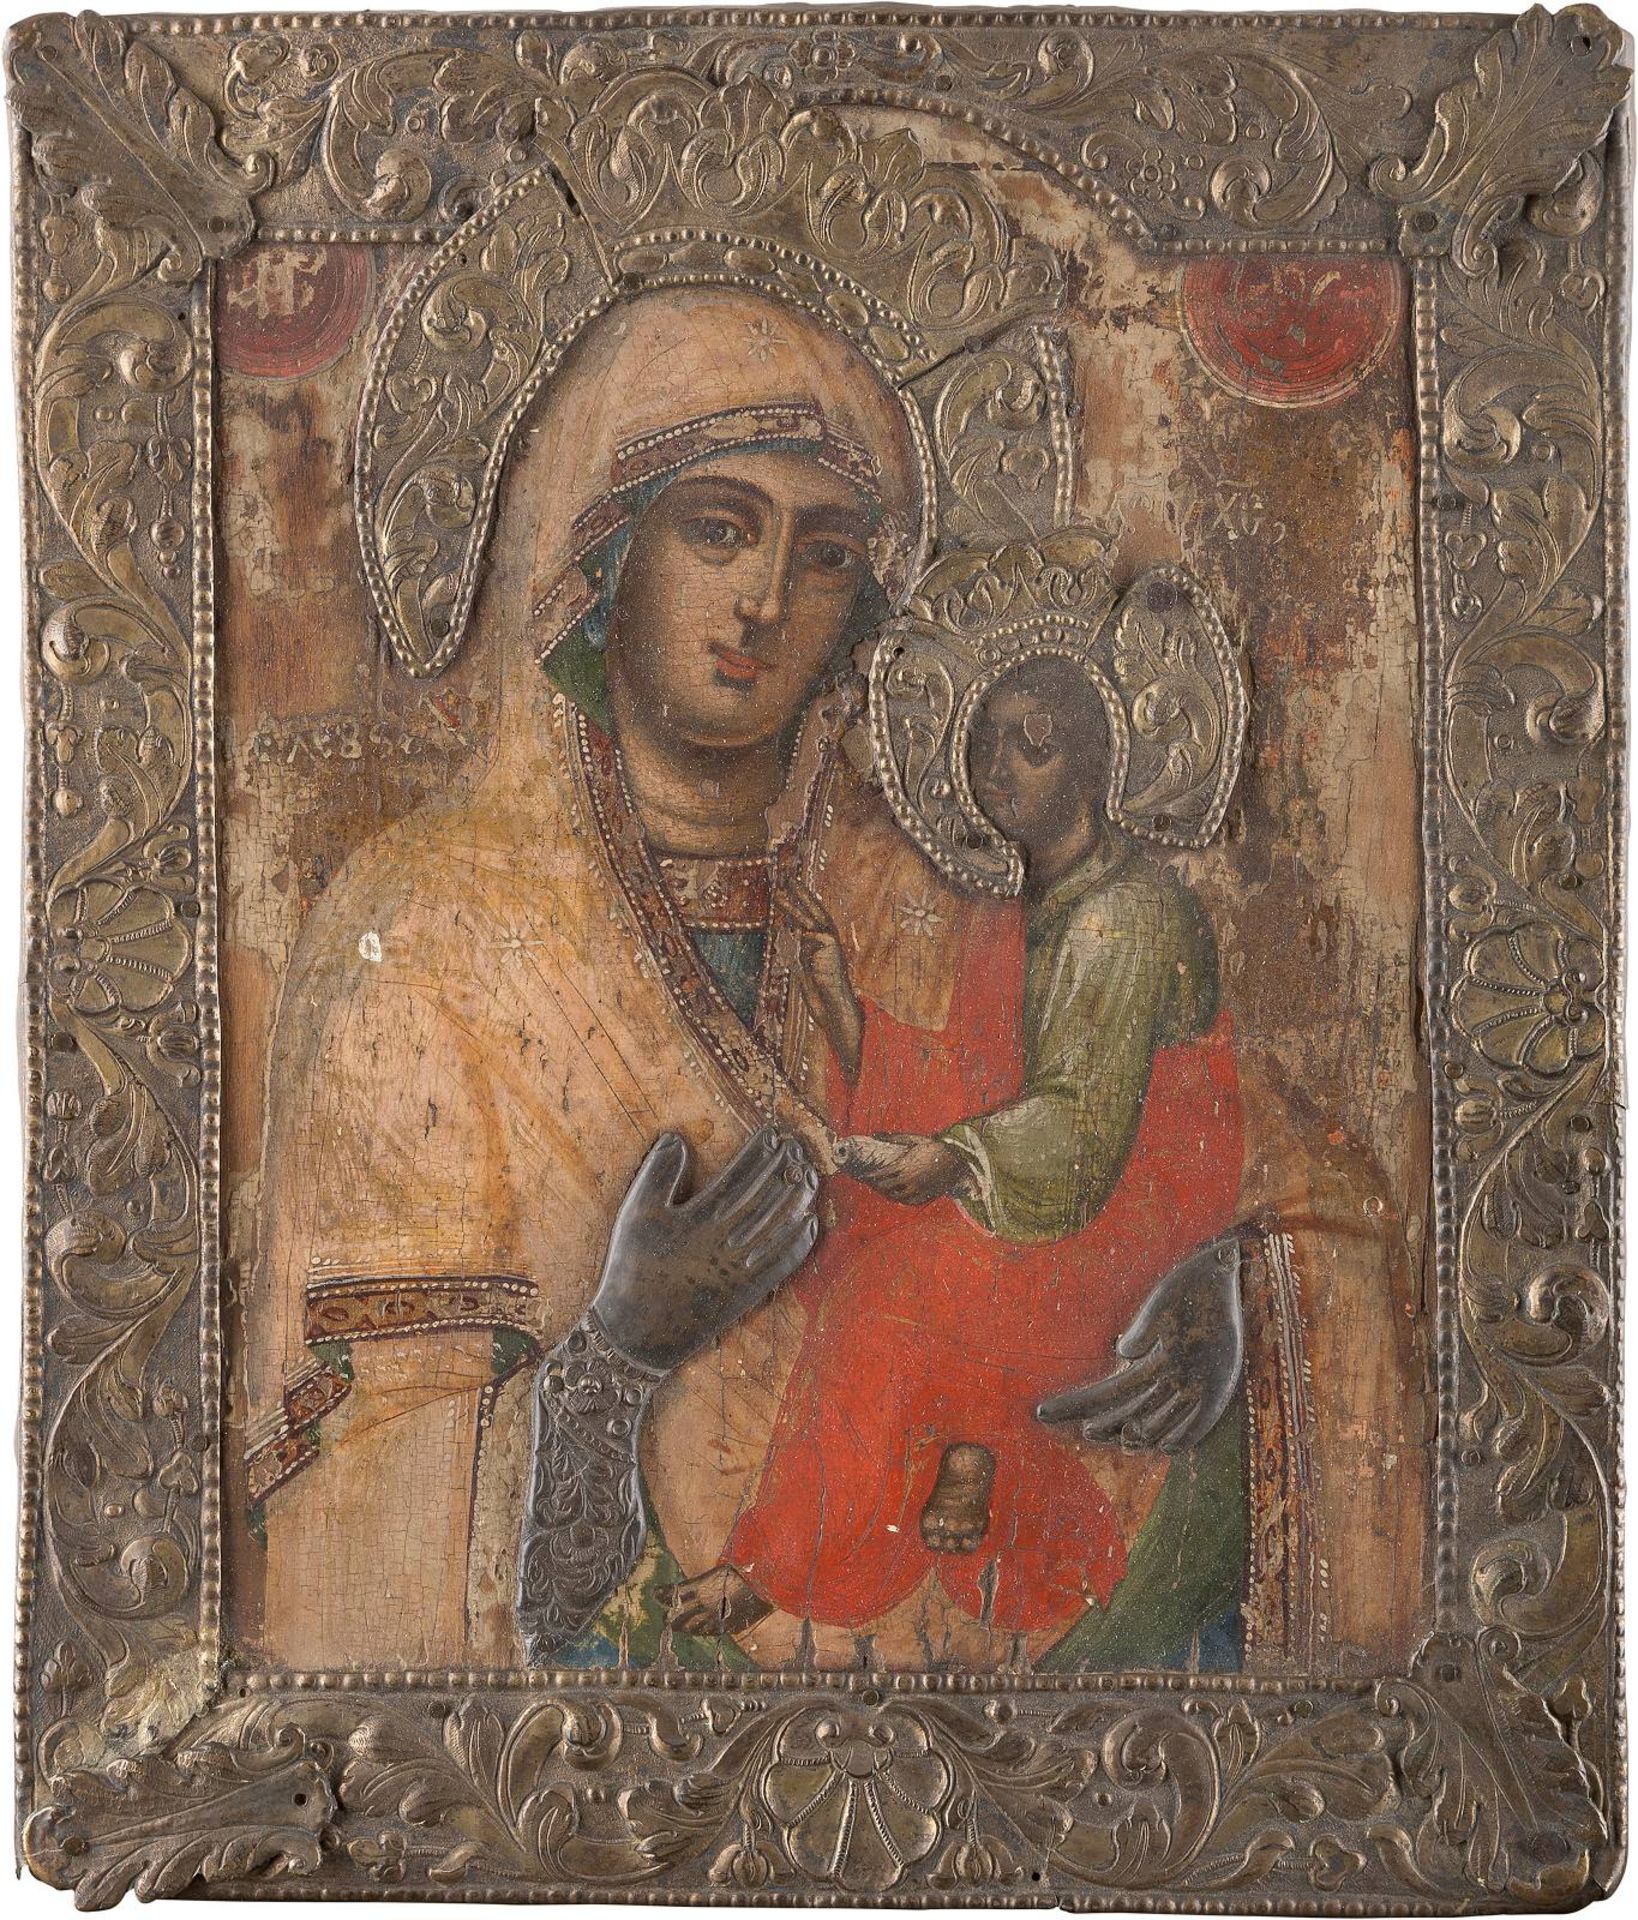 AN ICON OF THE HODIGITRIA MOTHER OF GODRomanian, 18th century Tempera on wood panel, on a gold